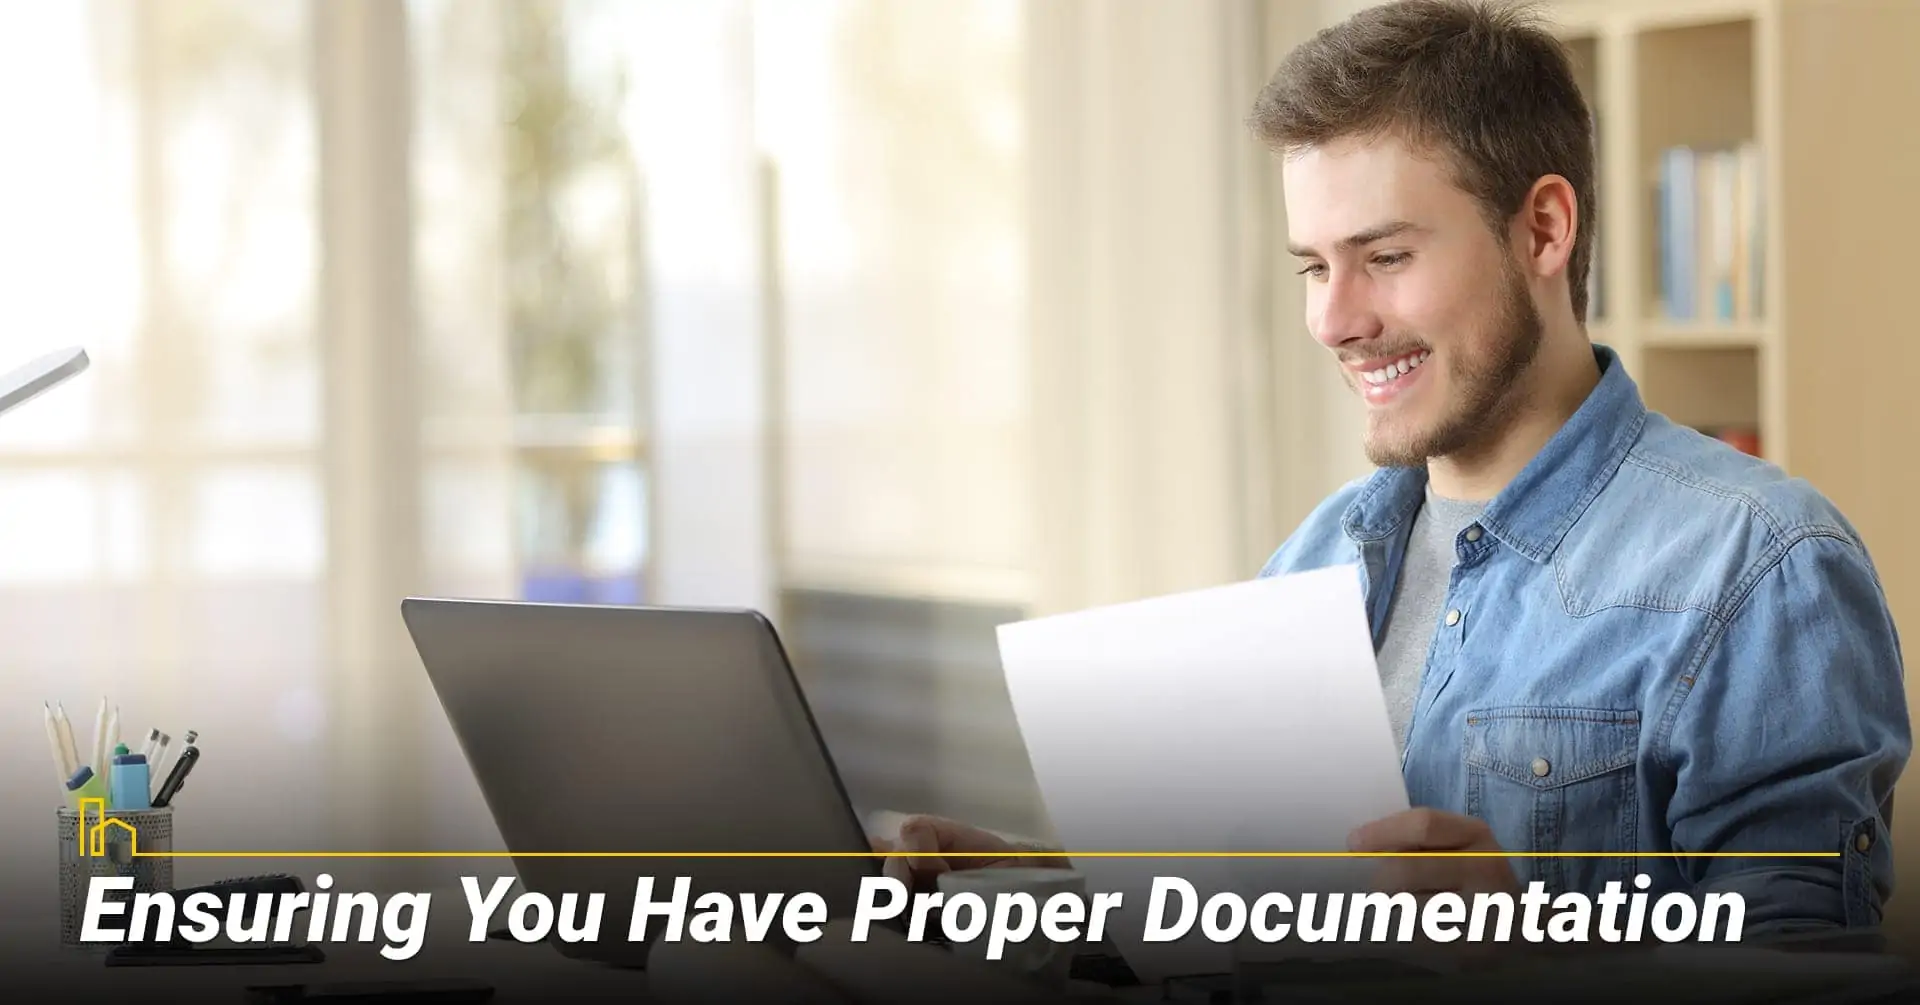 Ensuring You Have Proper Documentation, check for all documentations